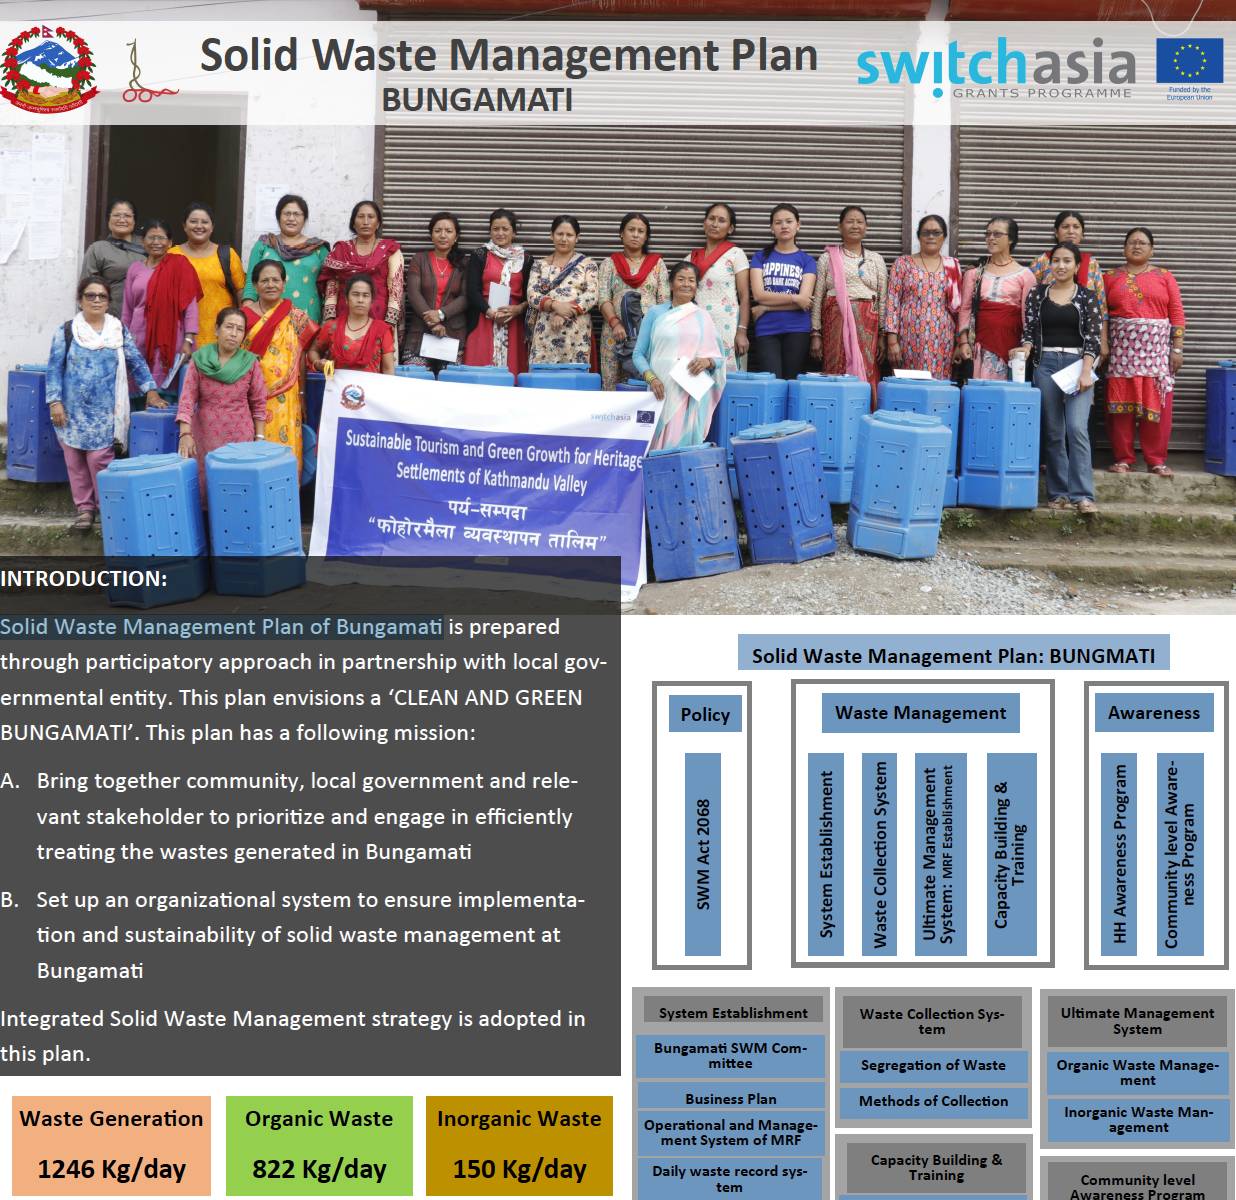 Solid Waste Management Plan of Bungamati